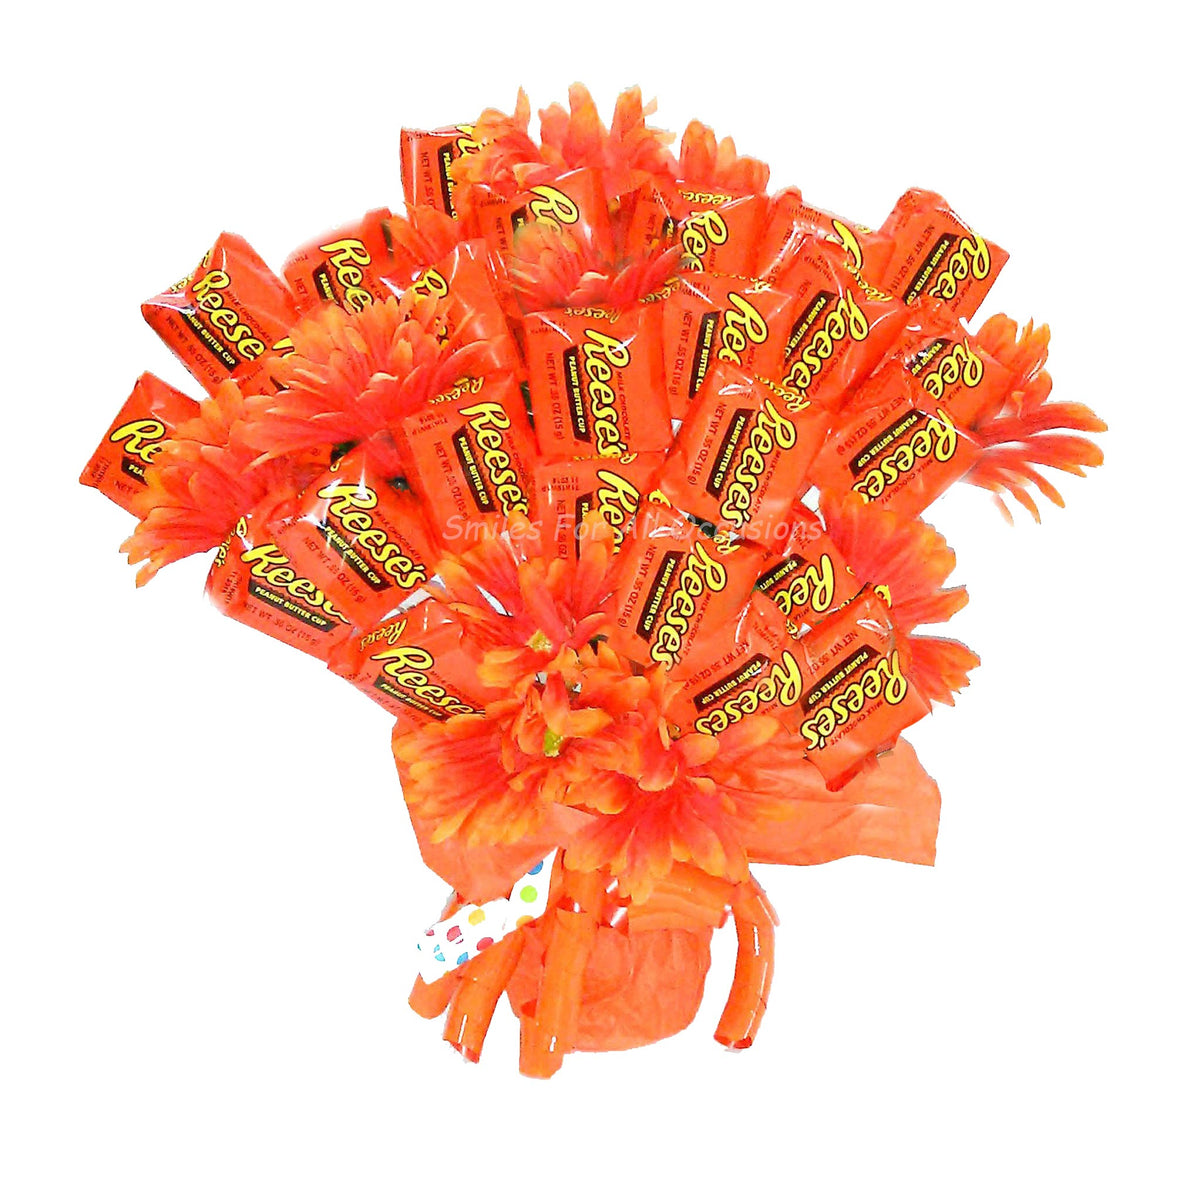 El Dulce  Birthday candy bouquet, Chocolate flowers bouquet, Gift